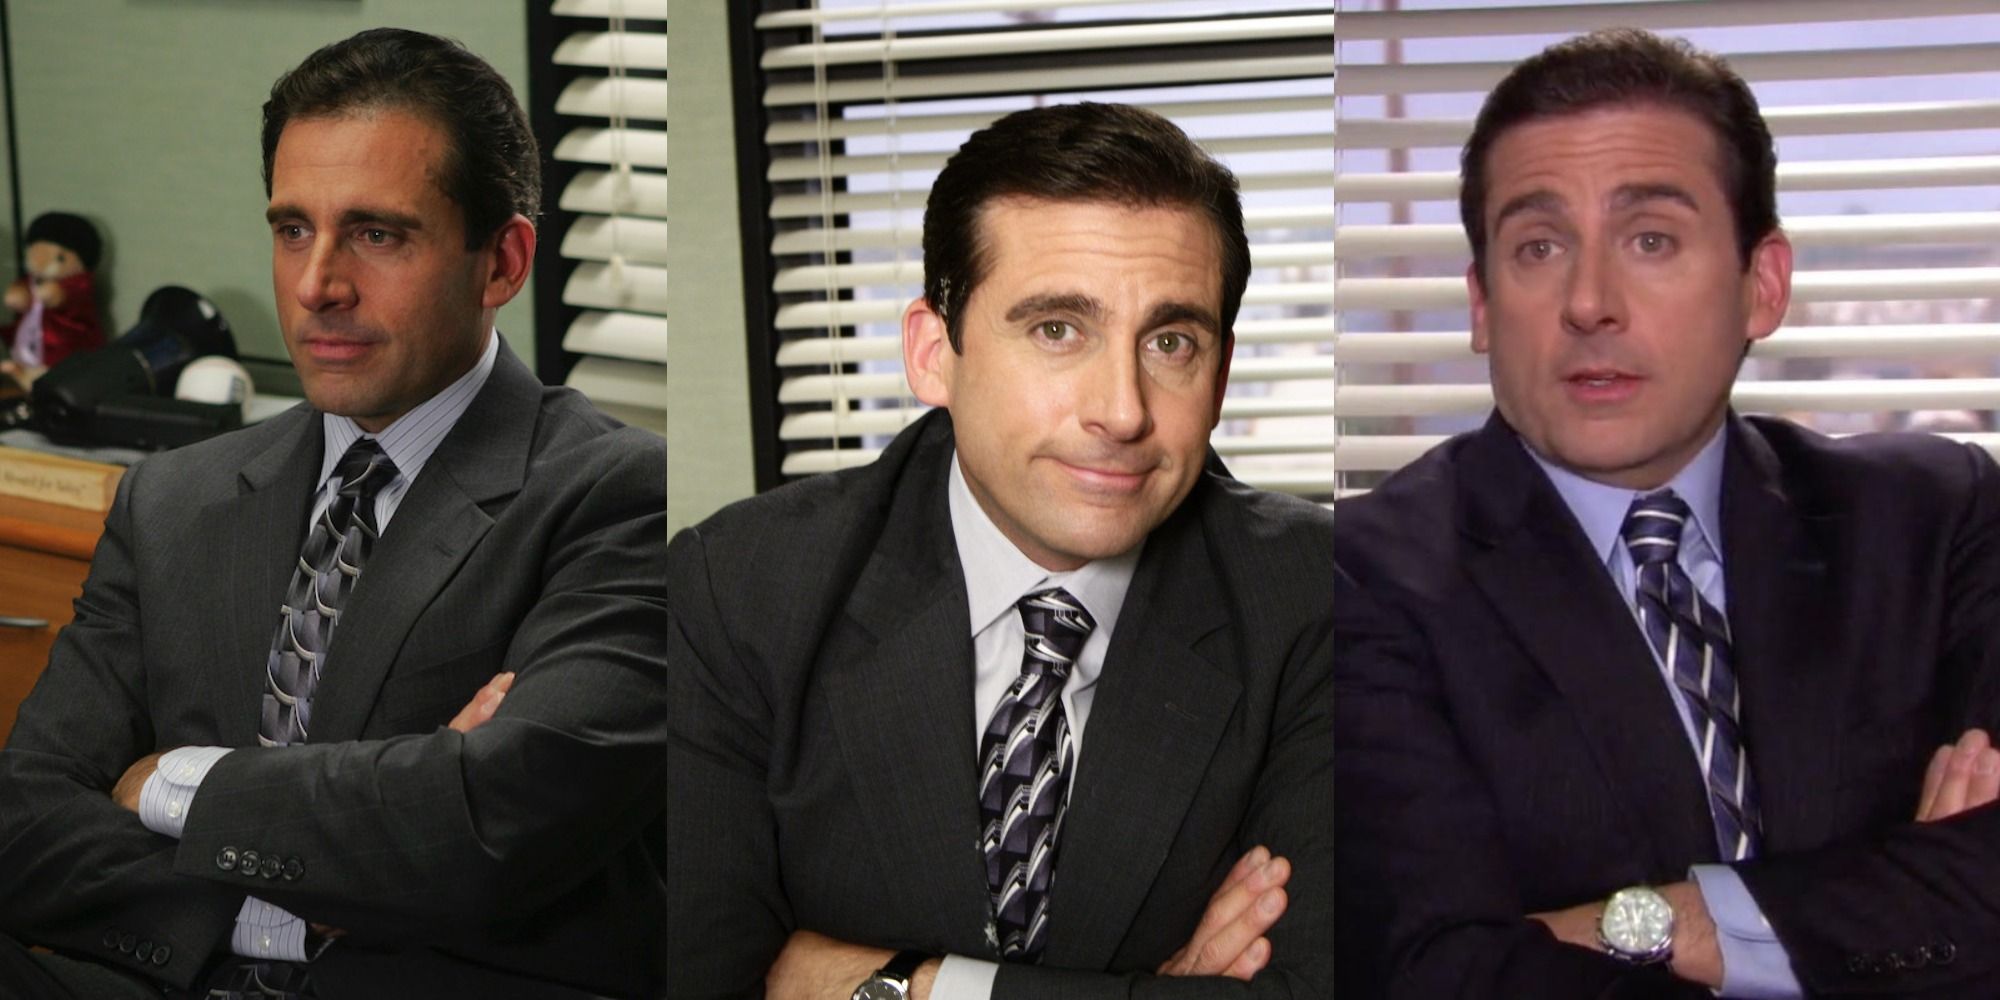 The Office: The 10 Funniest Michael Scott Humblebrags